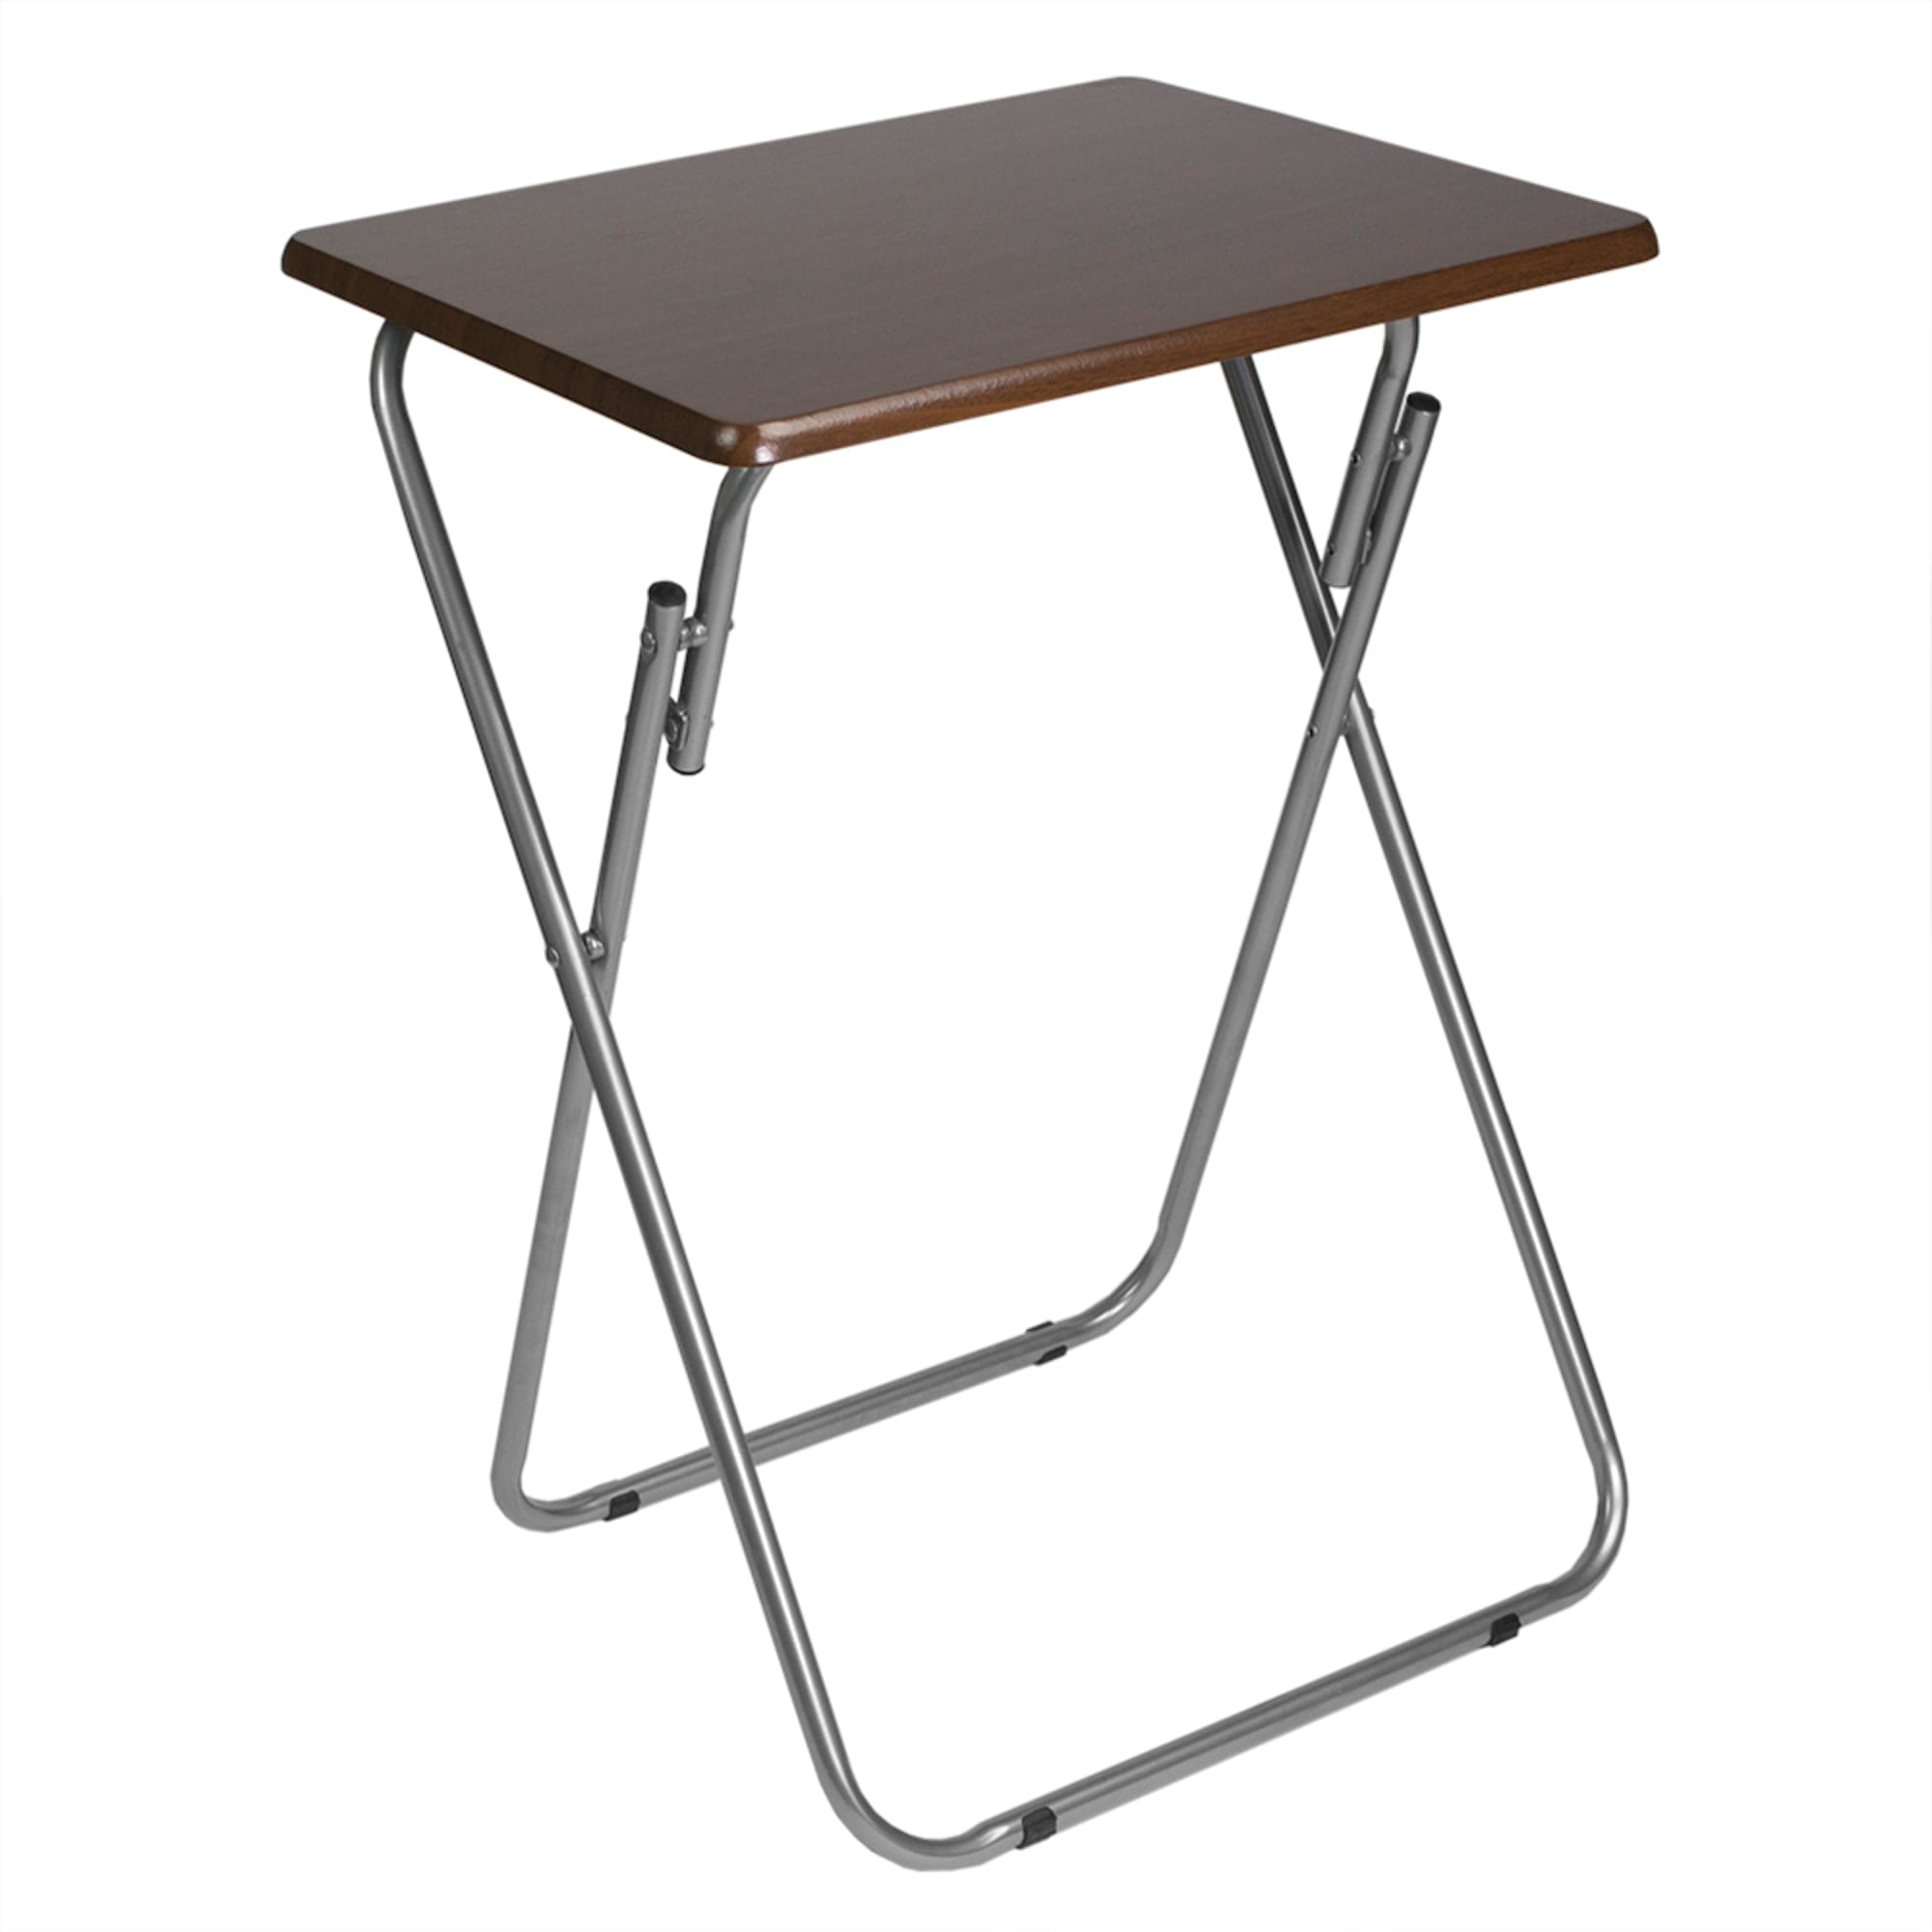 Home Basics Multi-Purpose Foldable Table, Cherry $15.00 EACH, CASE PACK OF 6